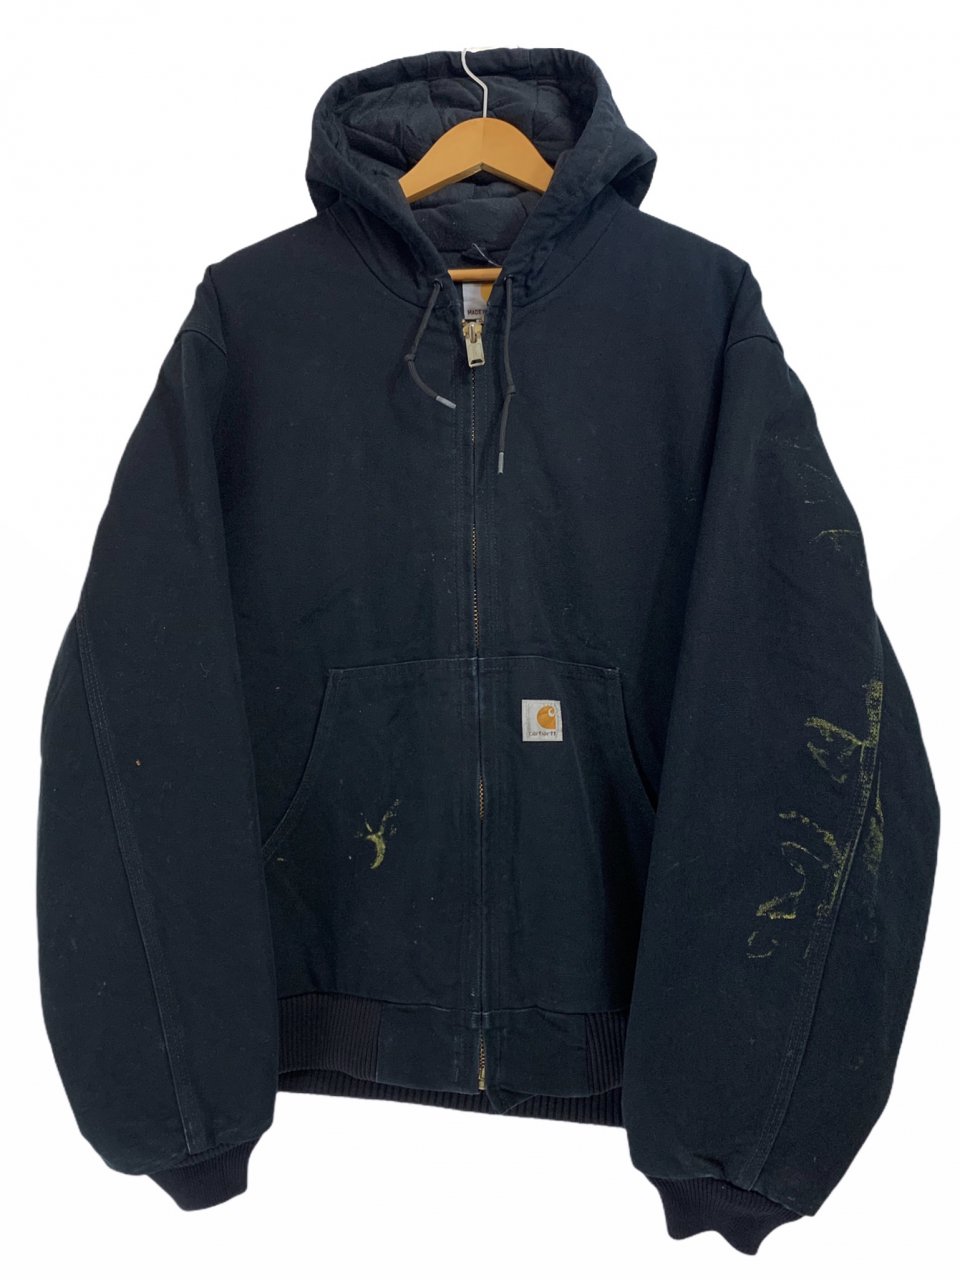 USA製 Carhartt Duck Active Jacket Quilted Flannel Lined 黒 L 